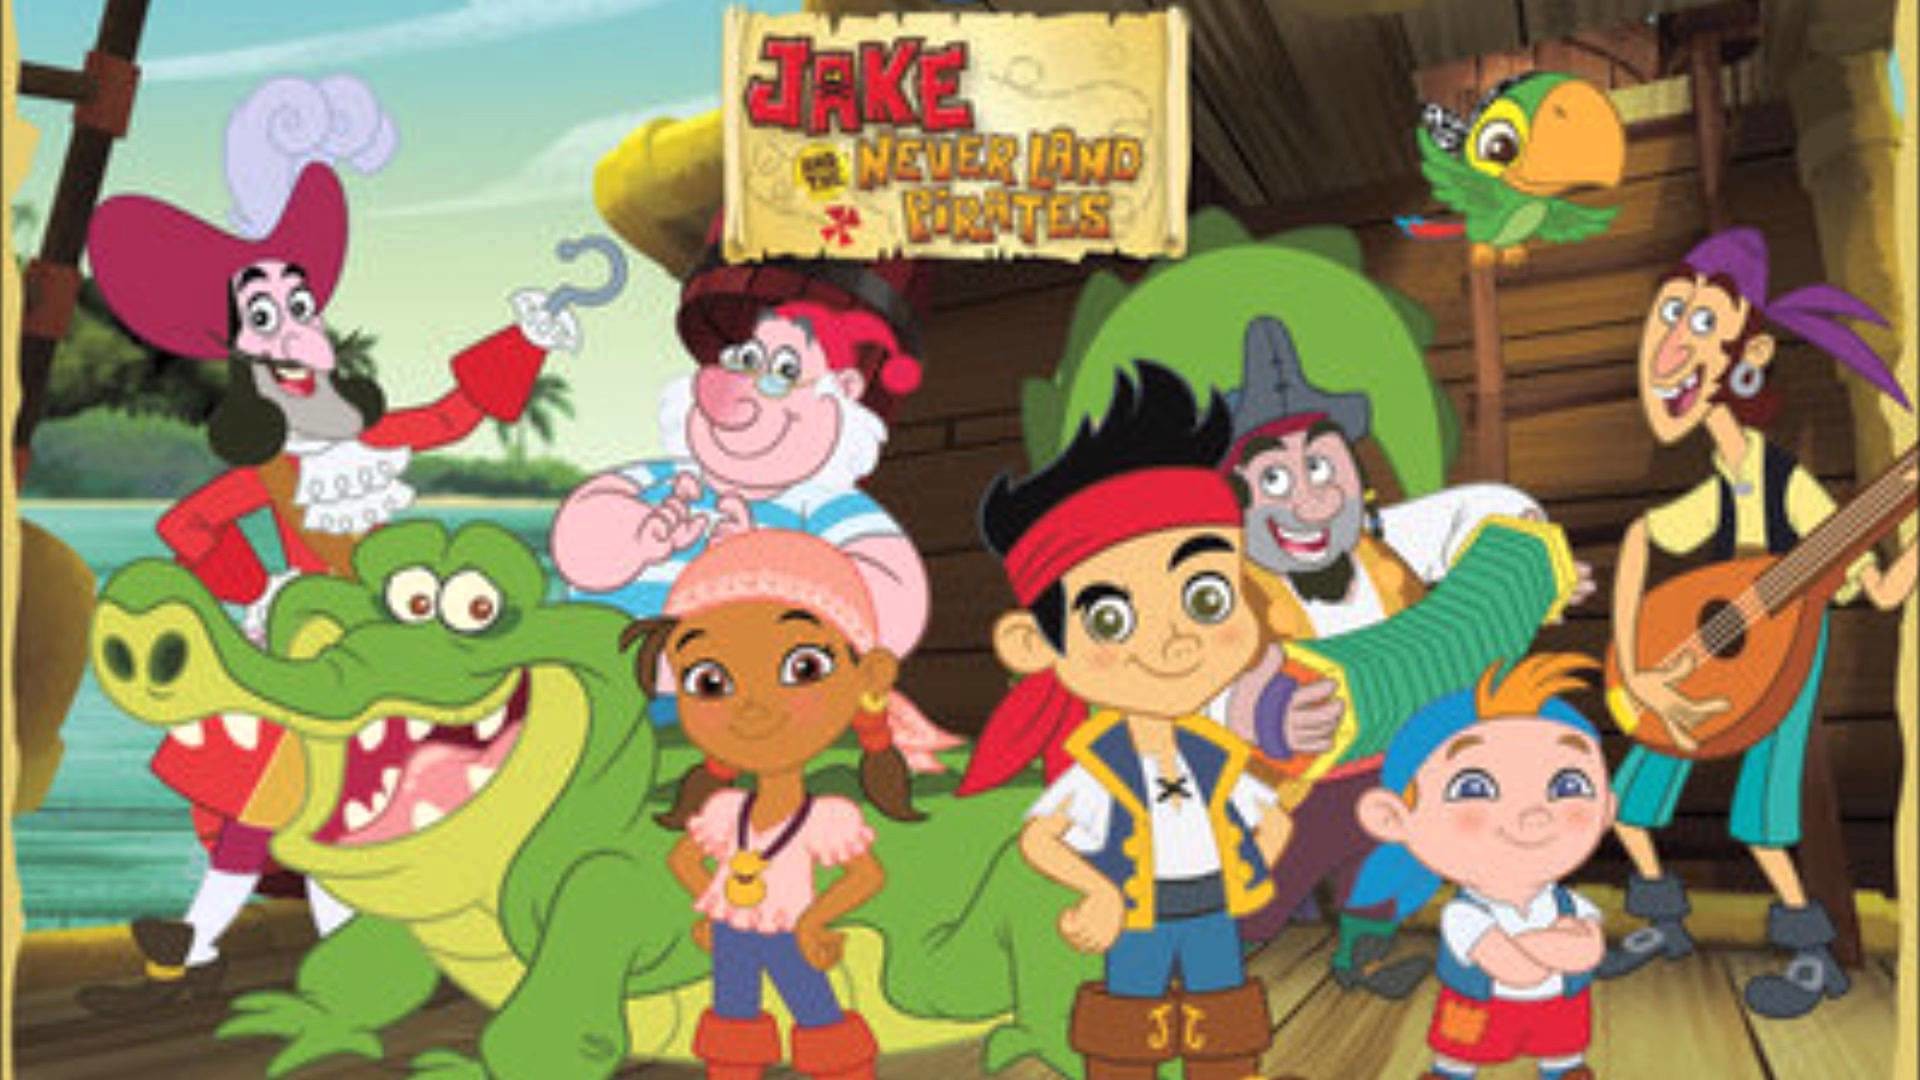 1920x1080 Maxresdefault Jake And The Neverland Pirates Wallpaper